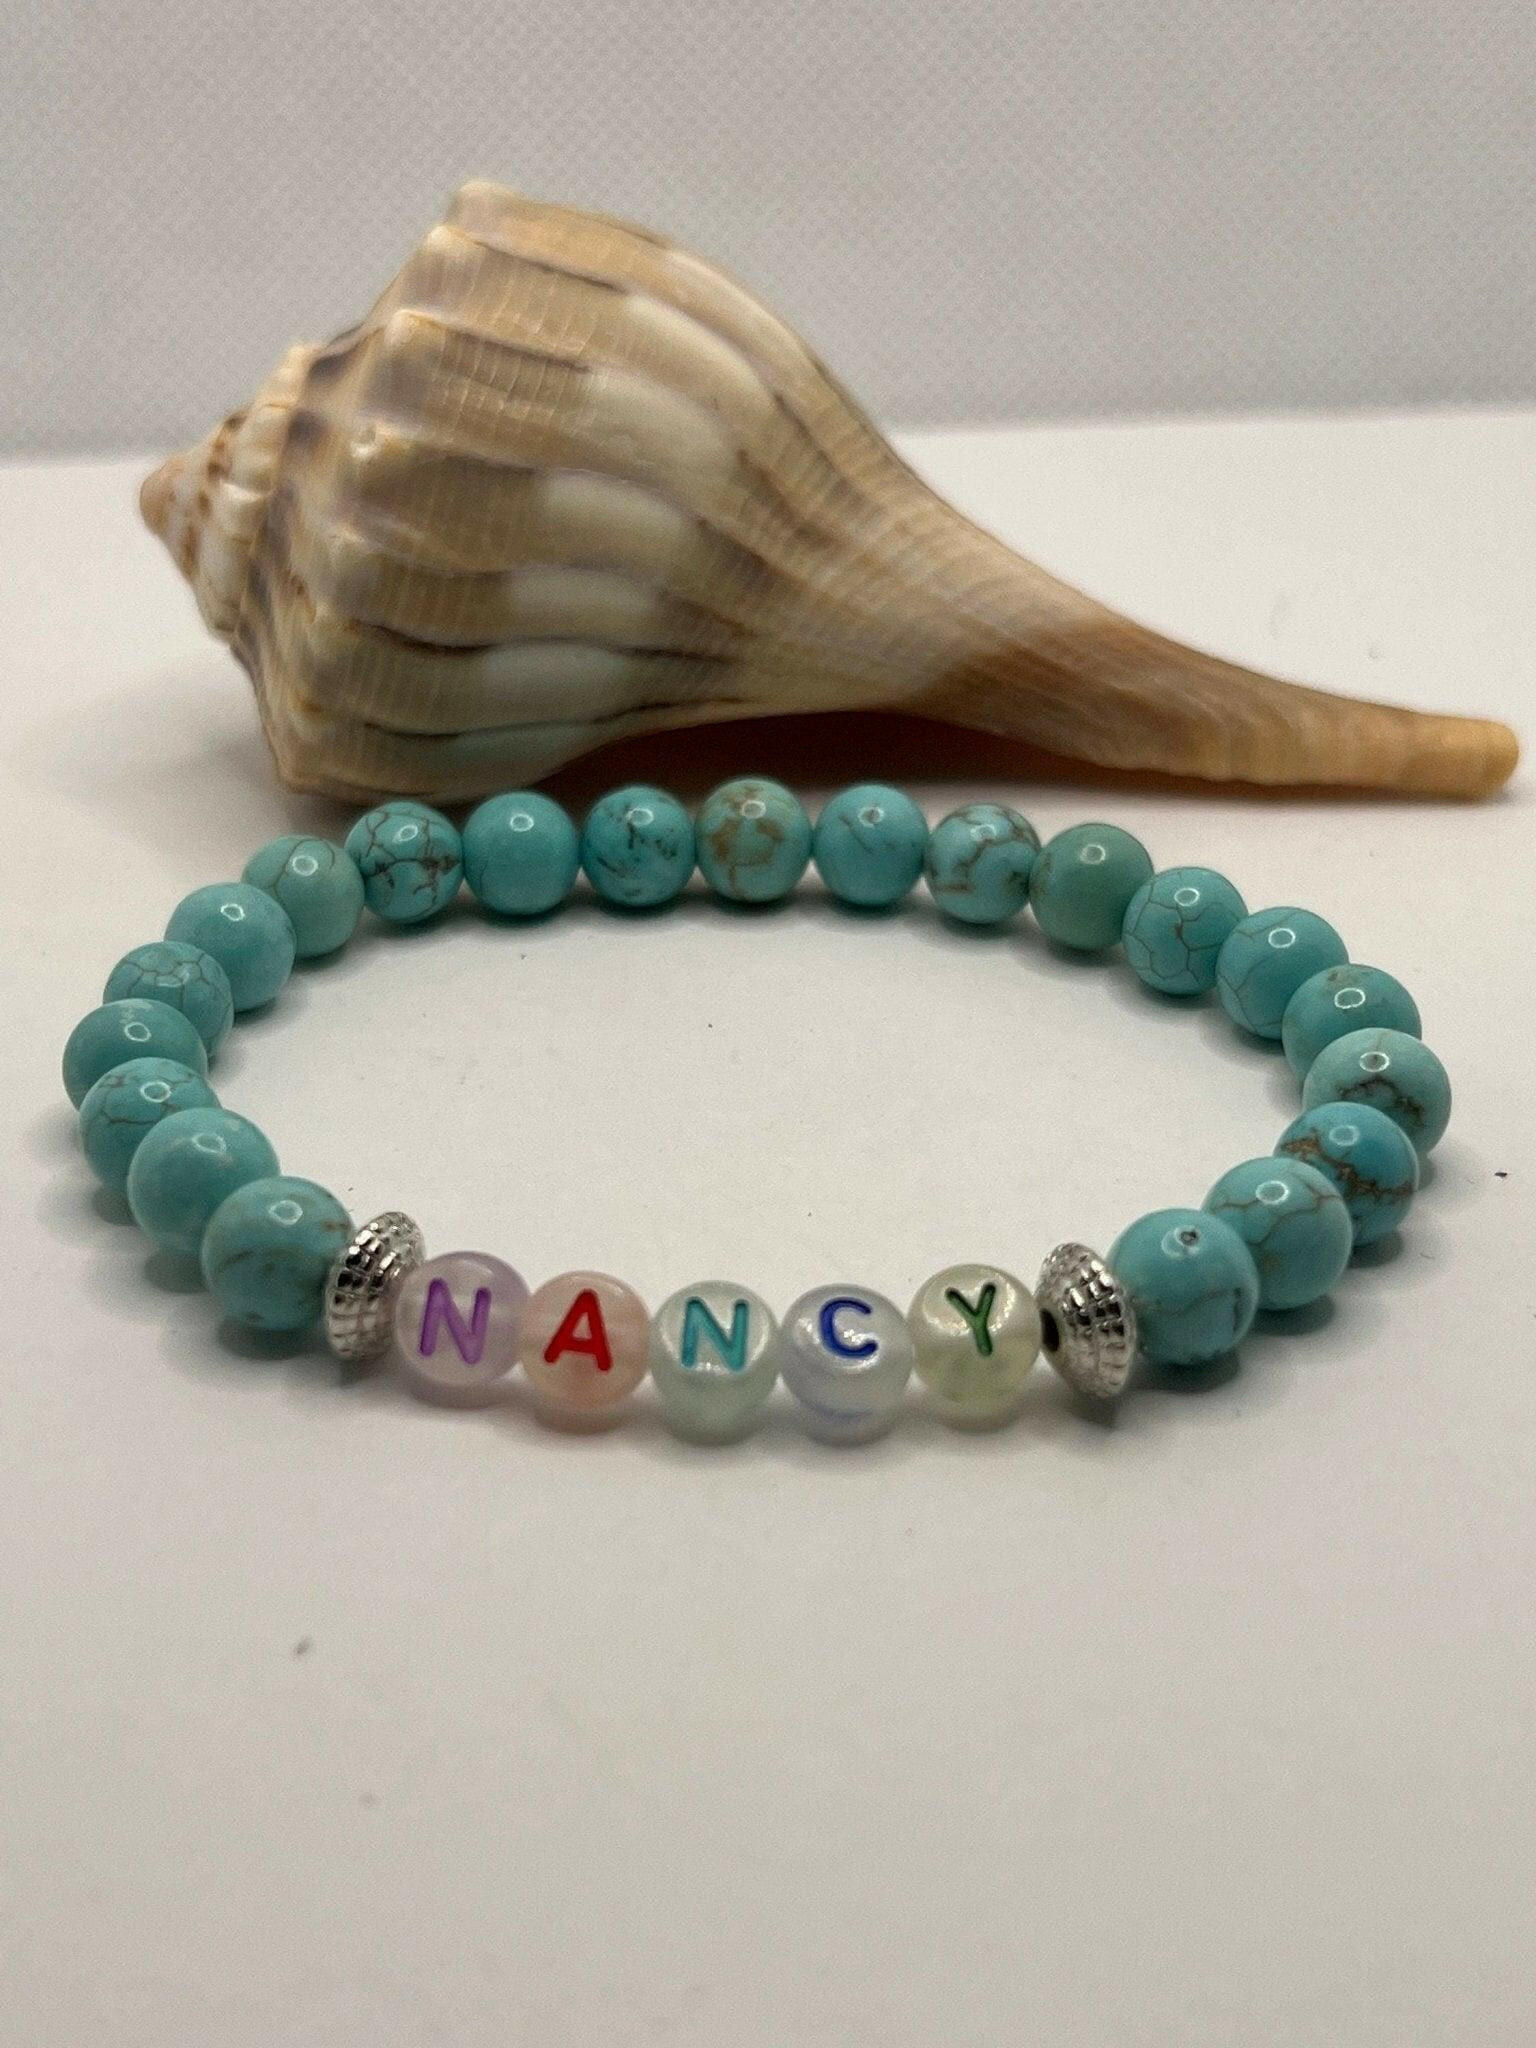 Bec Sue Jewelry Shop bracelet Enter name Bracelet / 6.5 / blue/ Turquoise Turquoise Custom name Bracelet, Turquoise Healing Stone Tags 487